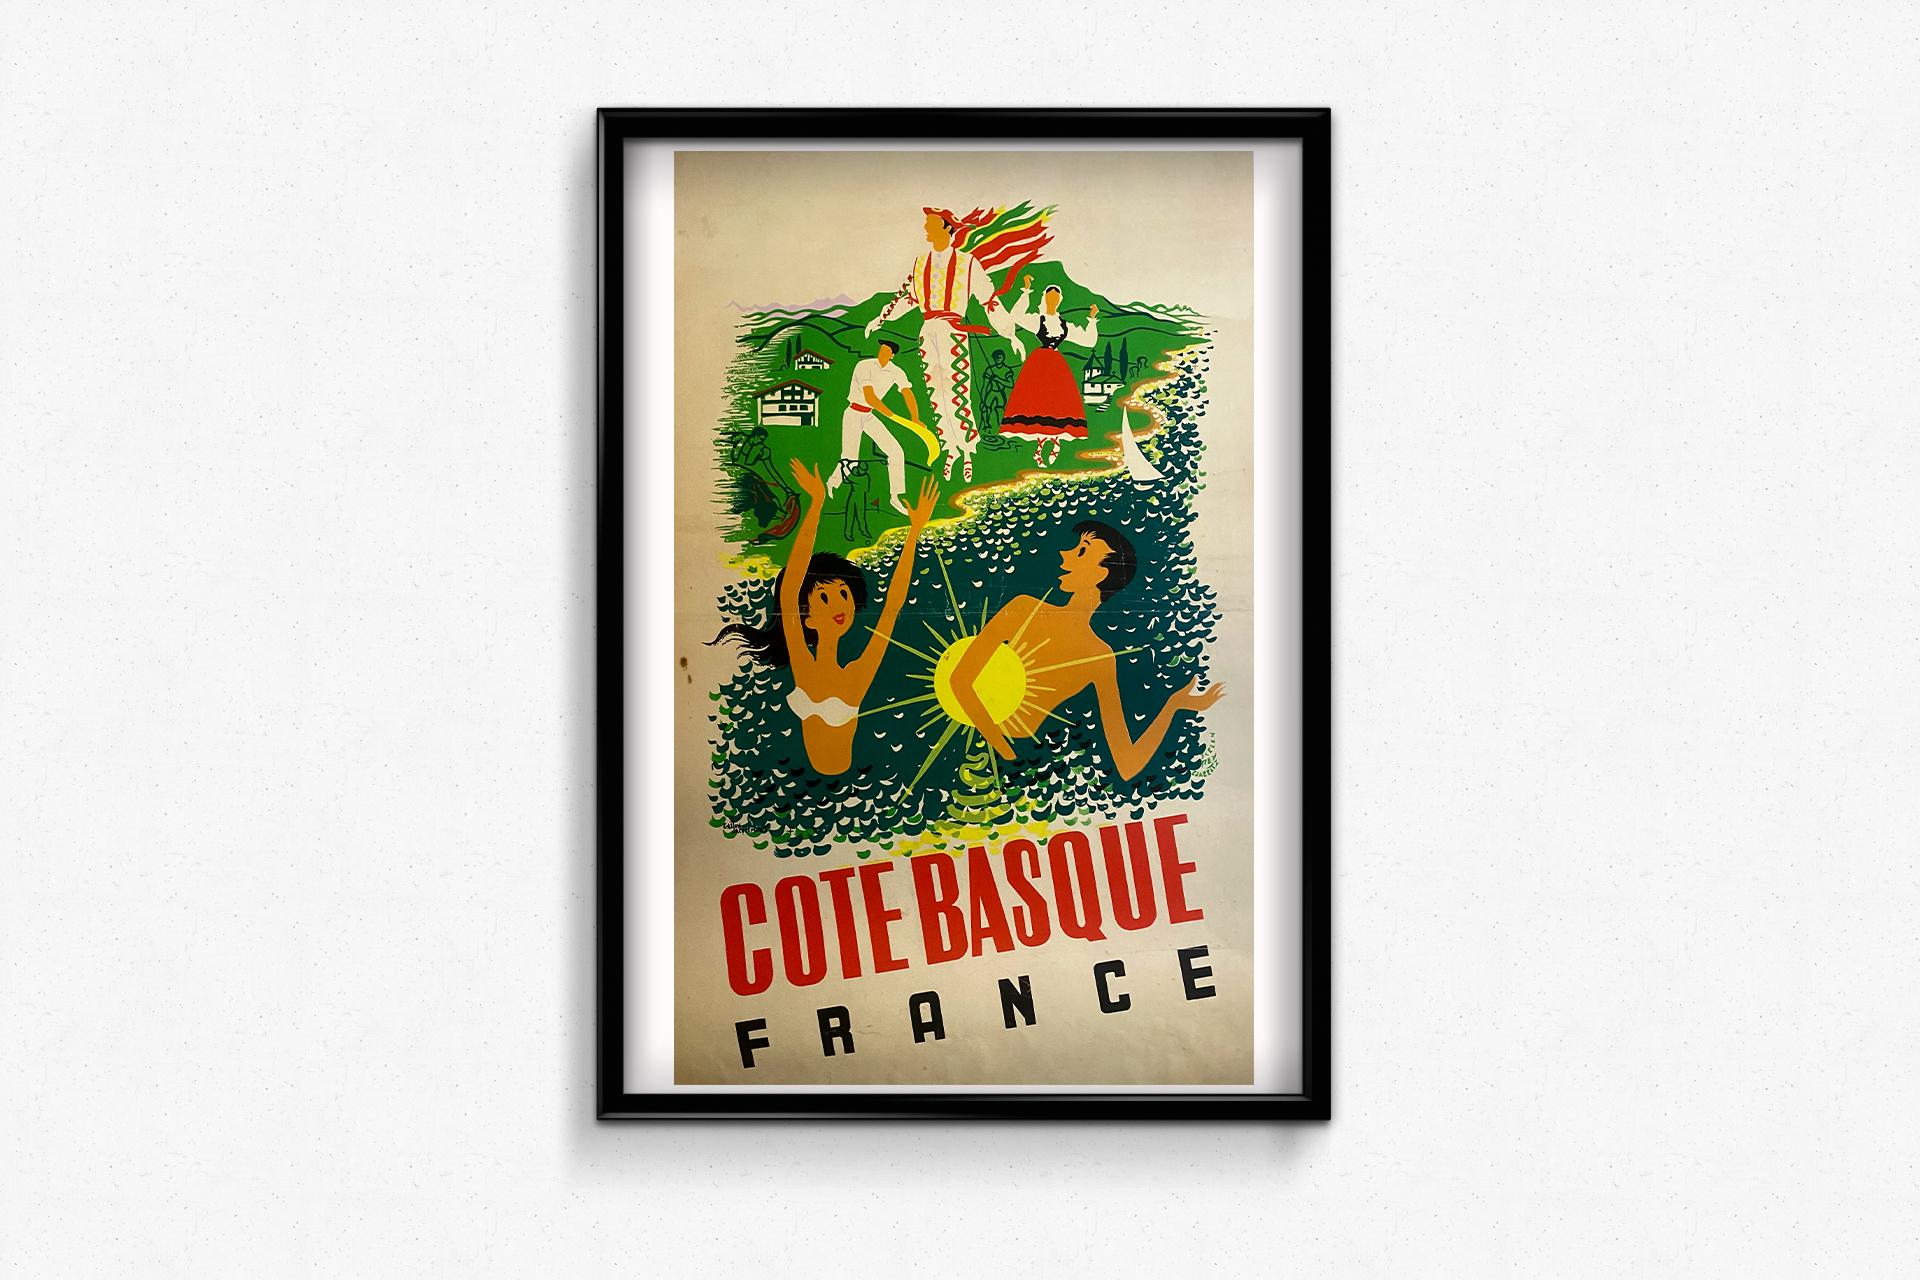 A beautiful poster that invites us to discover the Basque coast, its beaches, its golf courses, its traditional sport: Basque pelota, as well as all its other cultural aspects.

This poster was designed by Gaston Jacquement around 1940.

Sea -